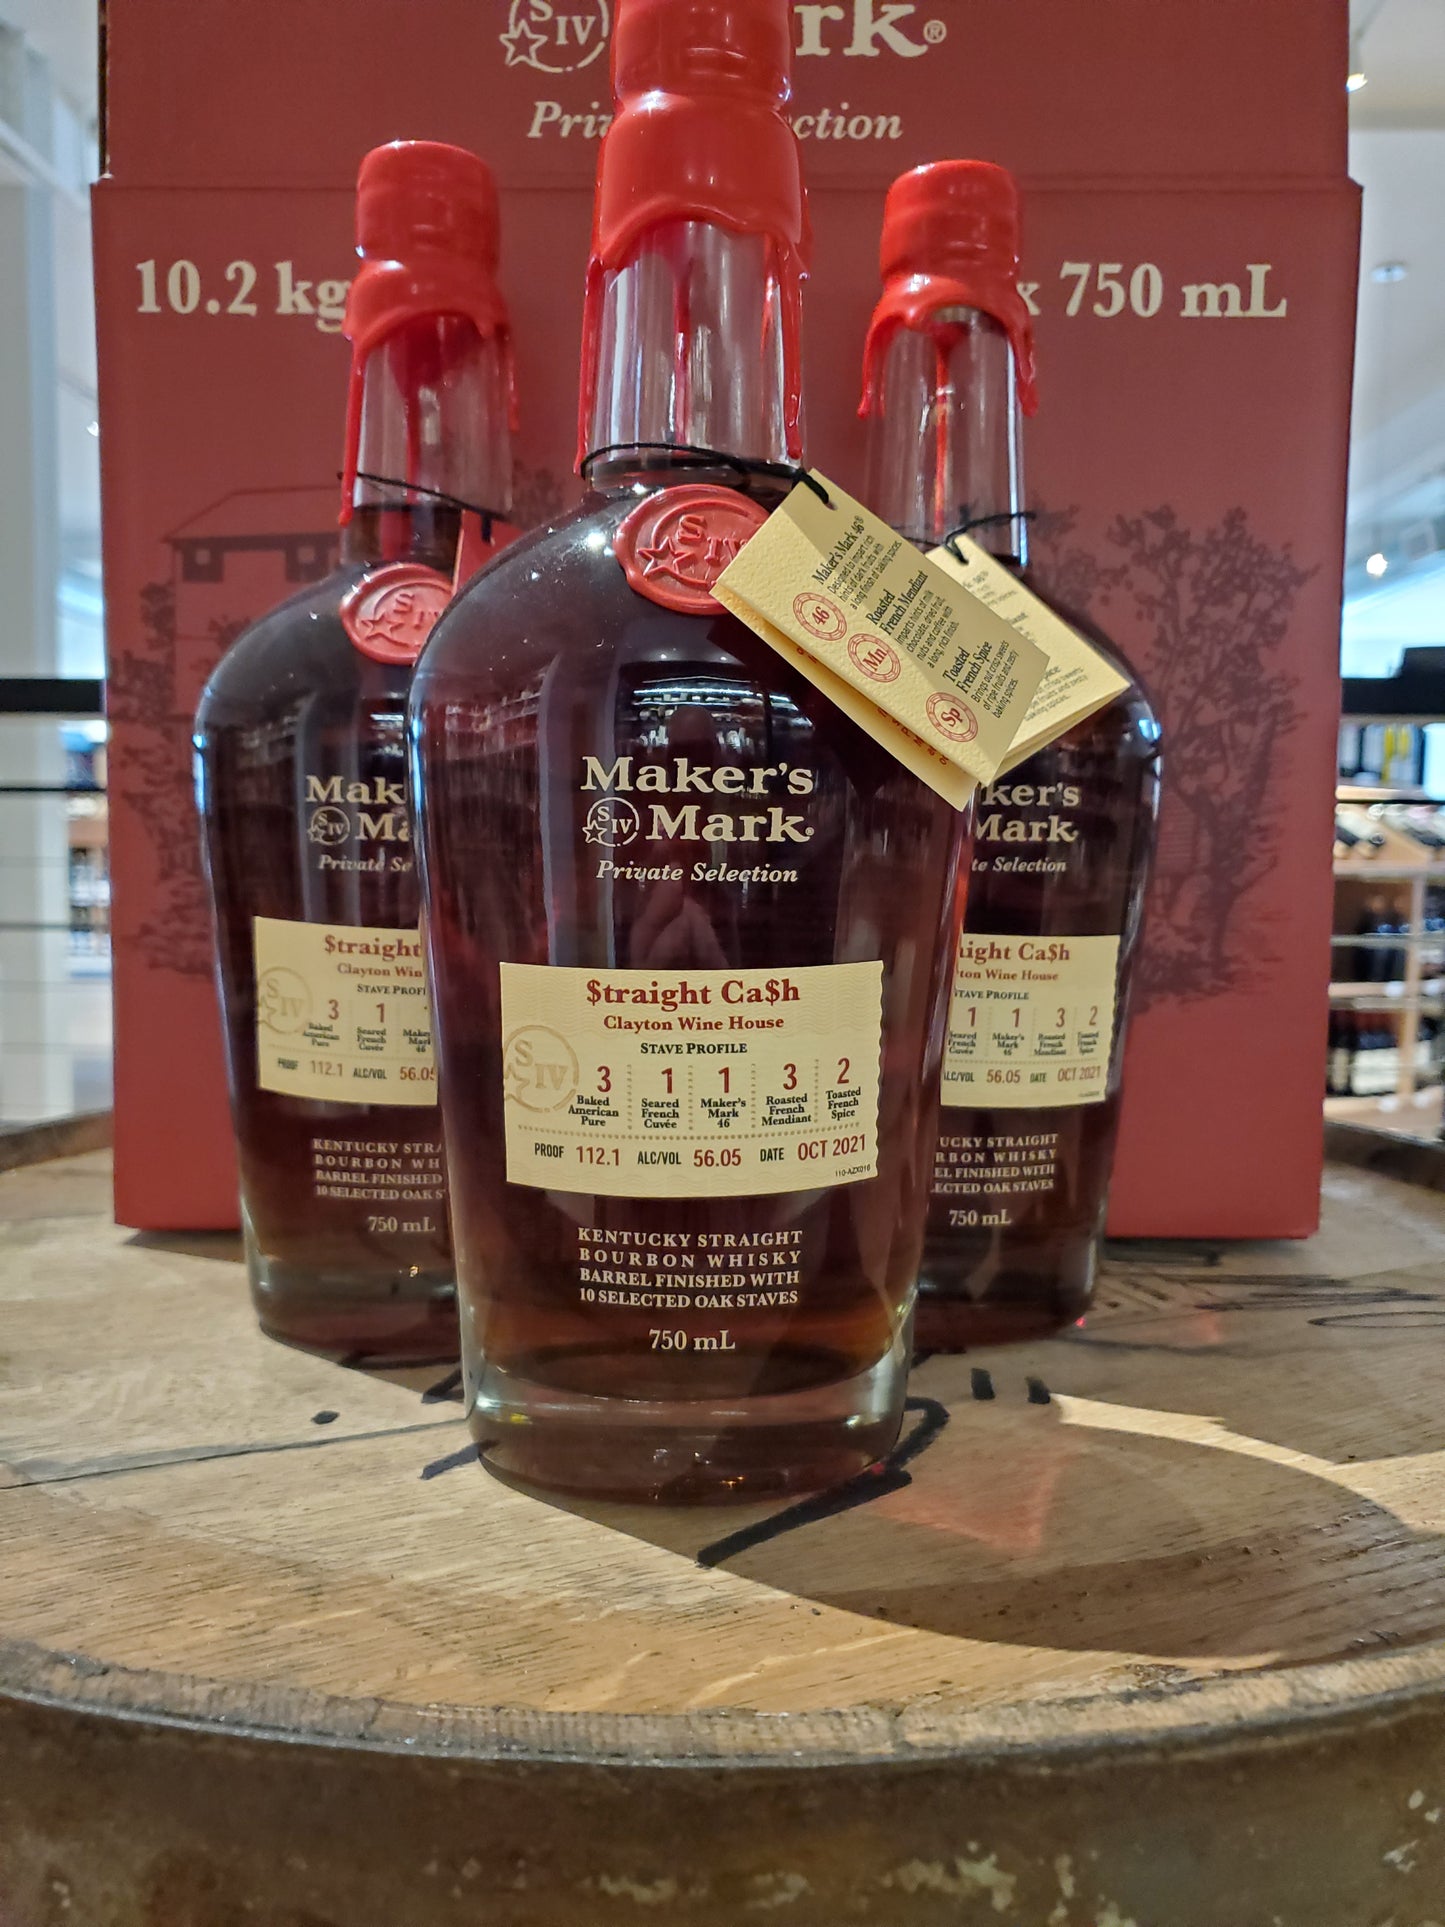 CWH Maker's Mark Private Select